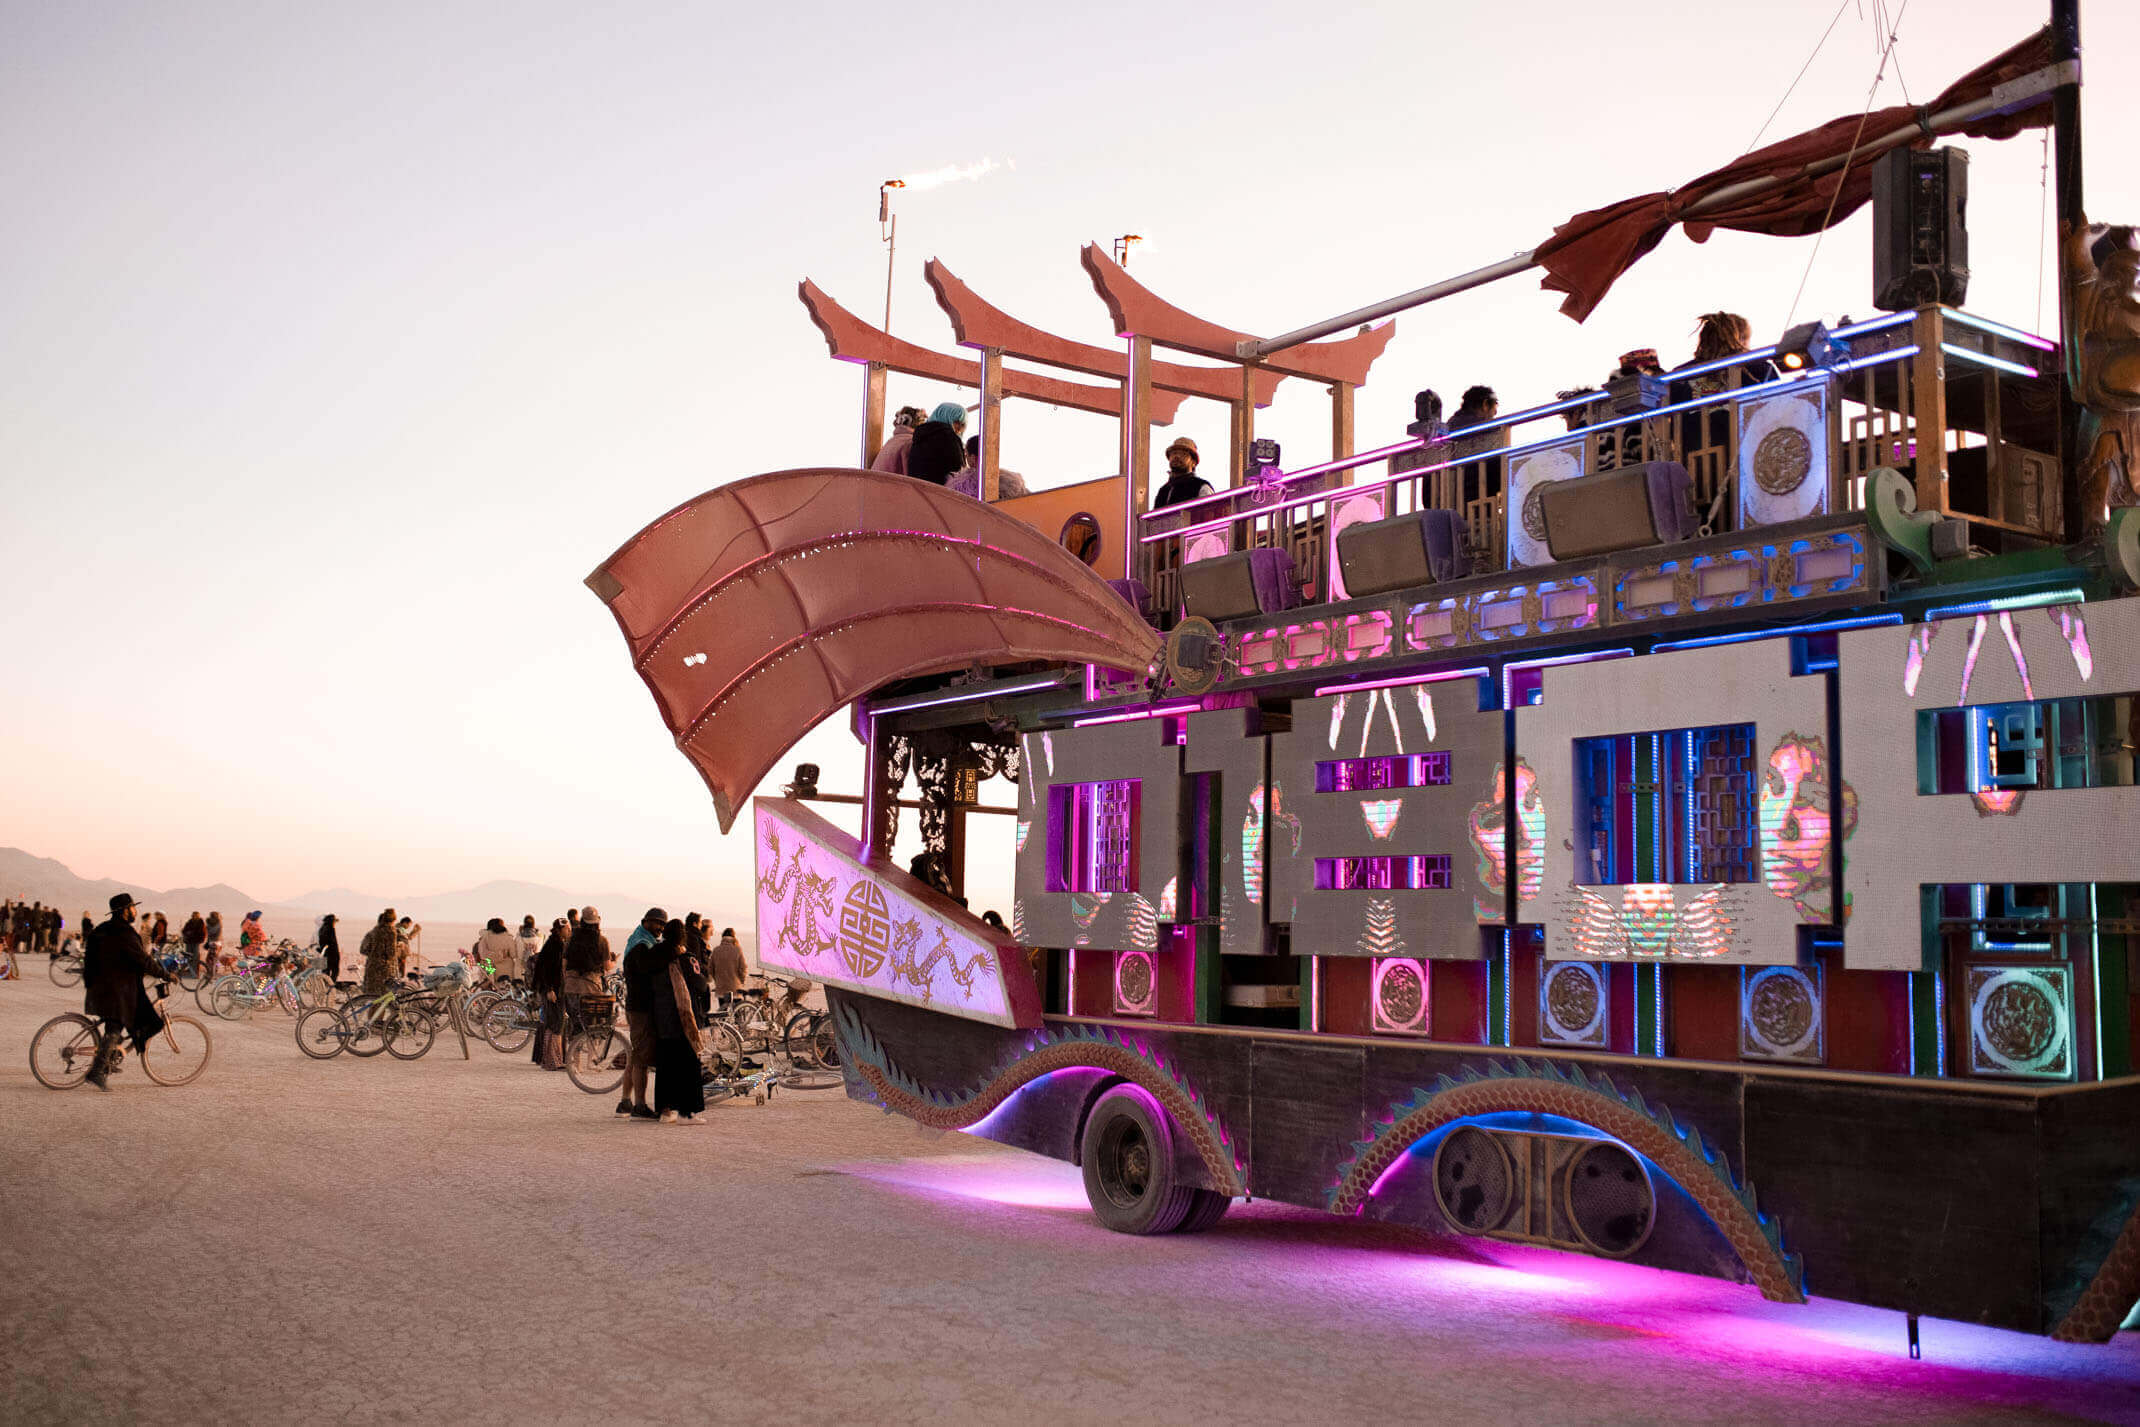 How much does it cost to go to Burning Man? A breakdown